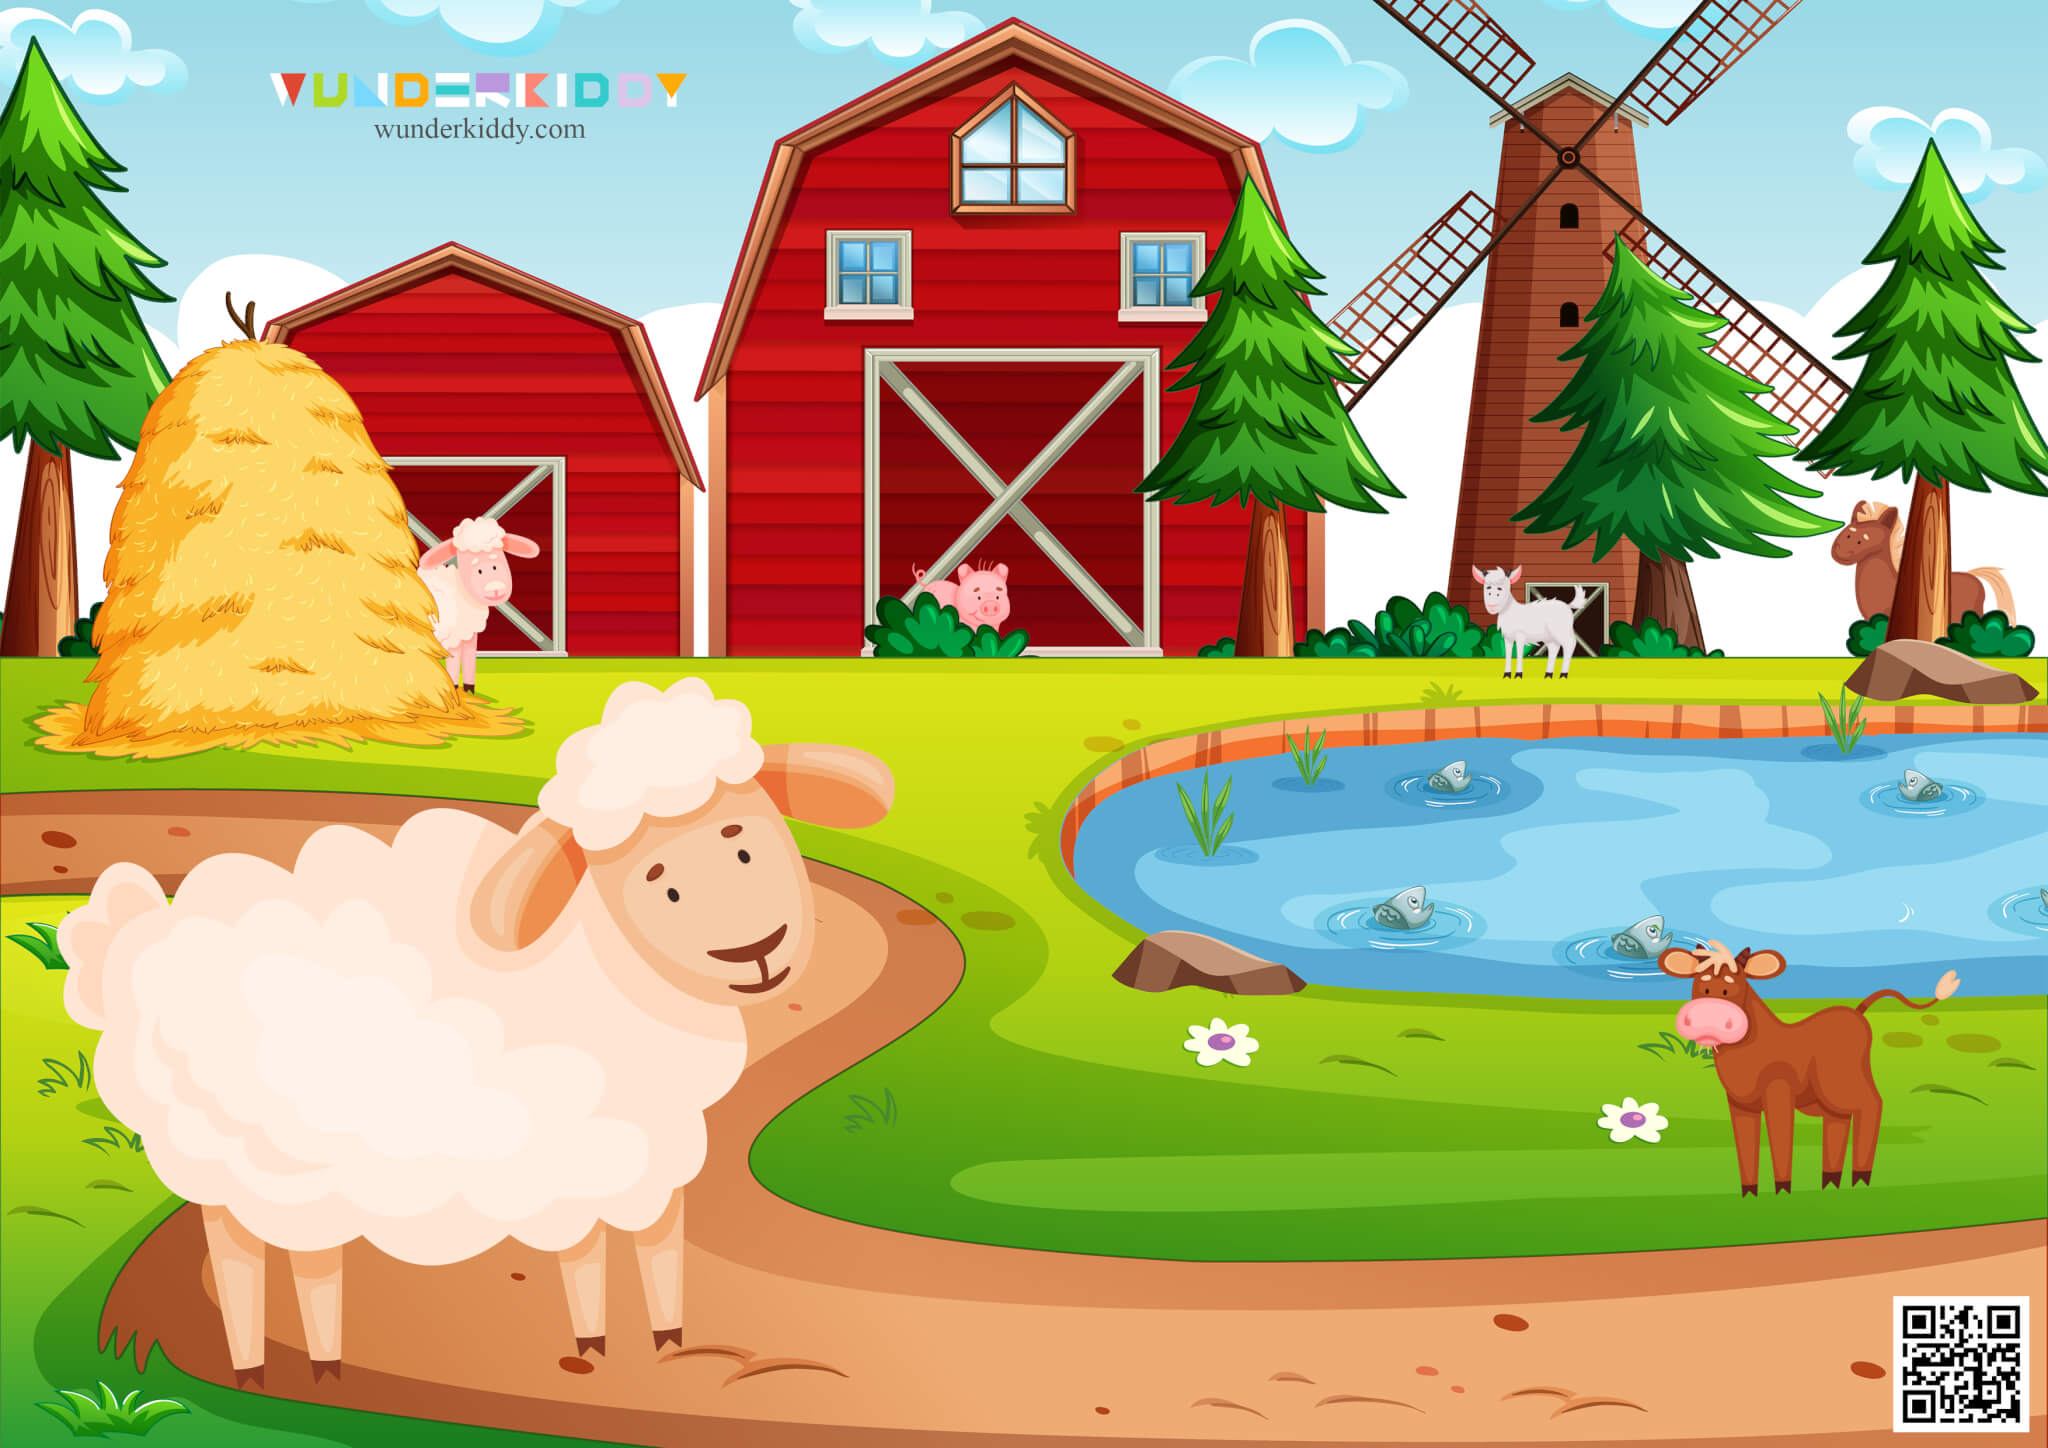 Worksheet Farm Animals and Their Young - Image 3